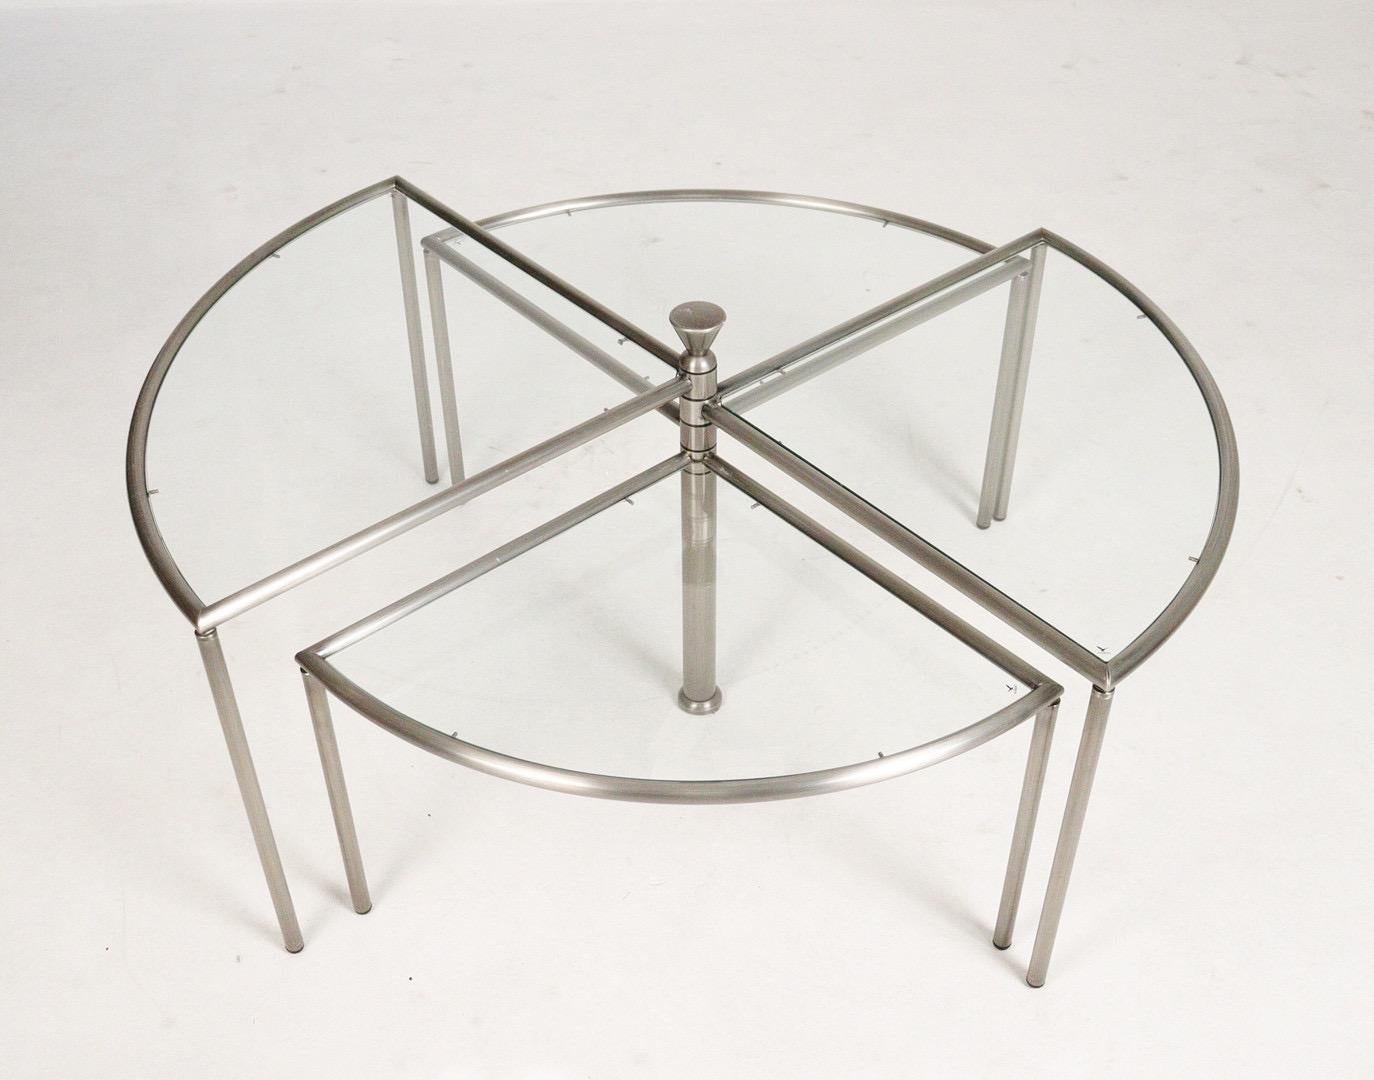 Introduce sleek Italian style to your living space with this iconic side table from the 1970s. The table boasts a stunning metal construction with a chrome-plated finish, providing a striking and durable centerpiece that's built to